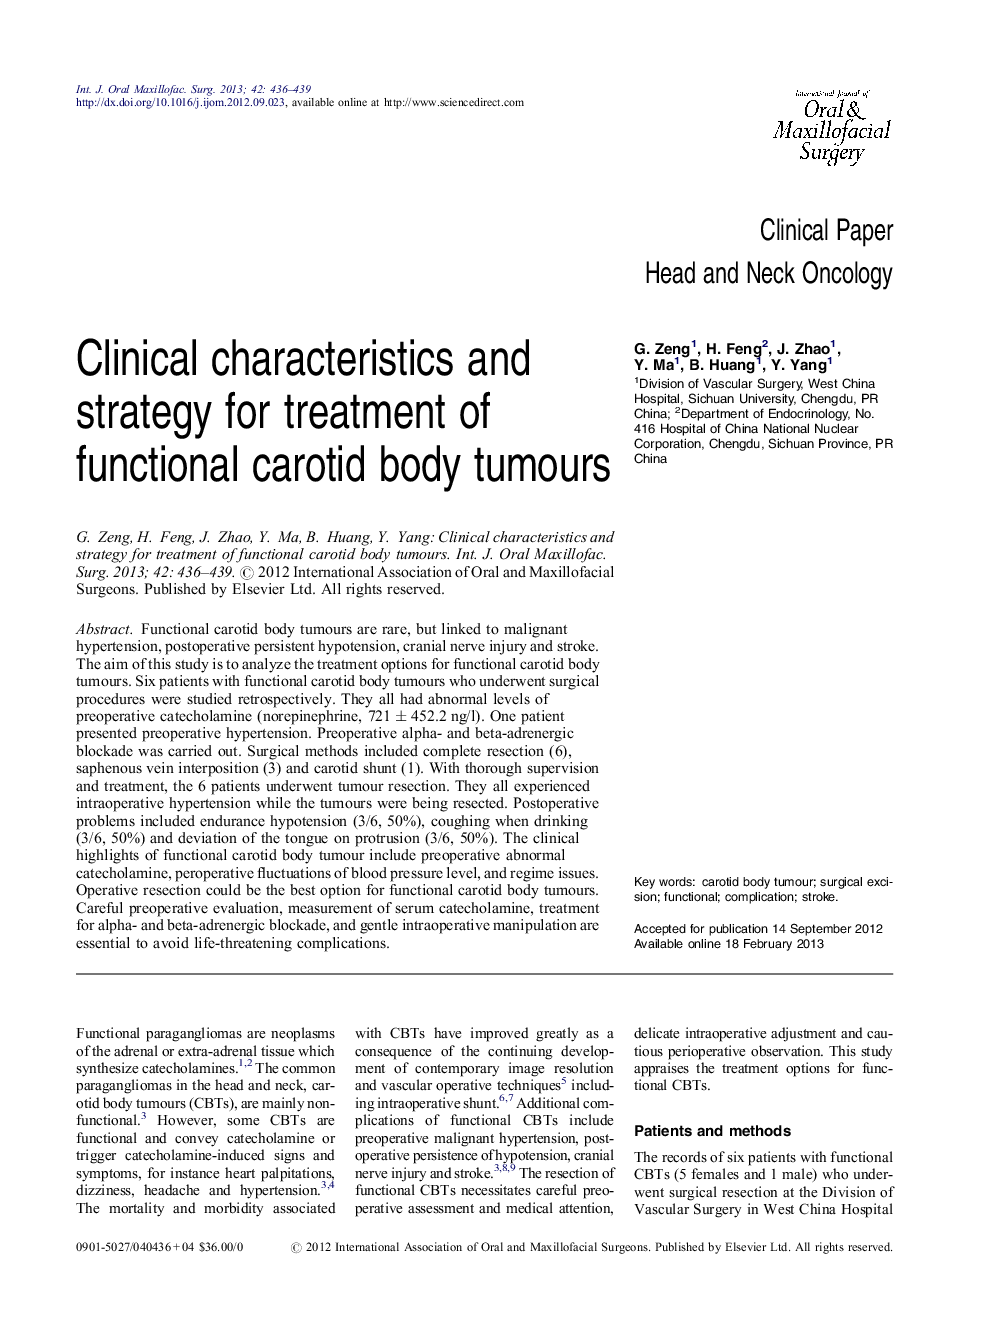 Clinical characteristics and strategy for treatment of functional carotid body tumours